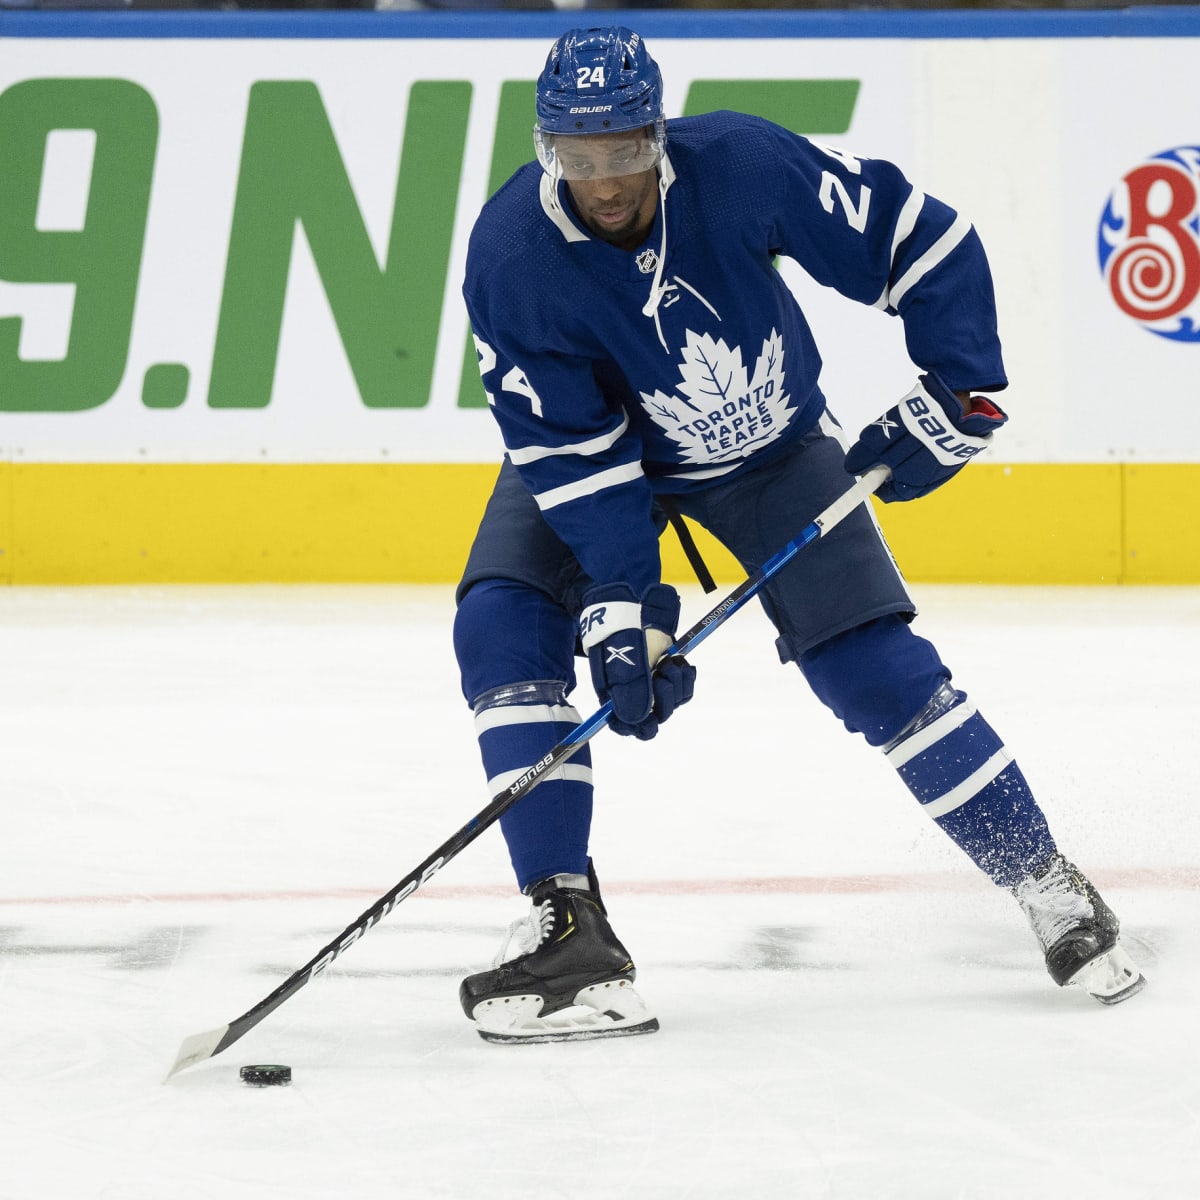 Wayne Simmonds appears to be back in the fold for the Leafs - HockeyFeed